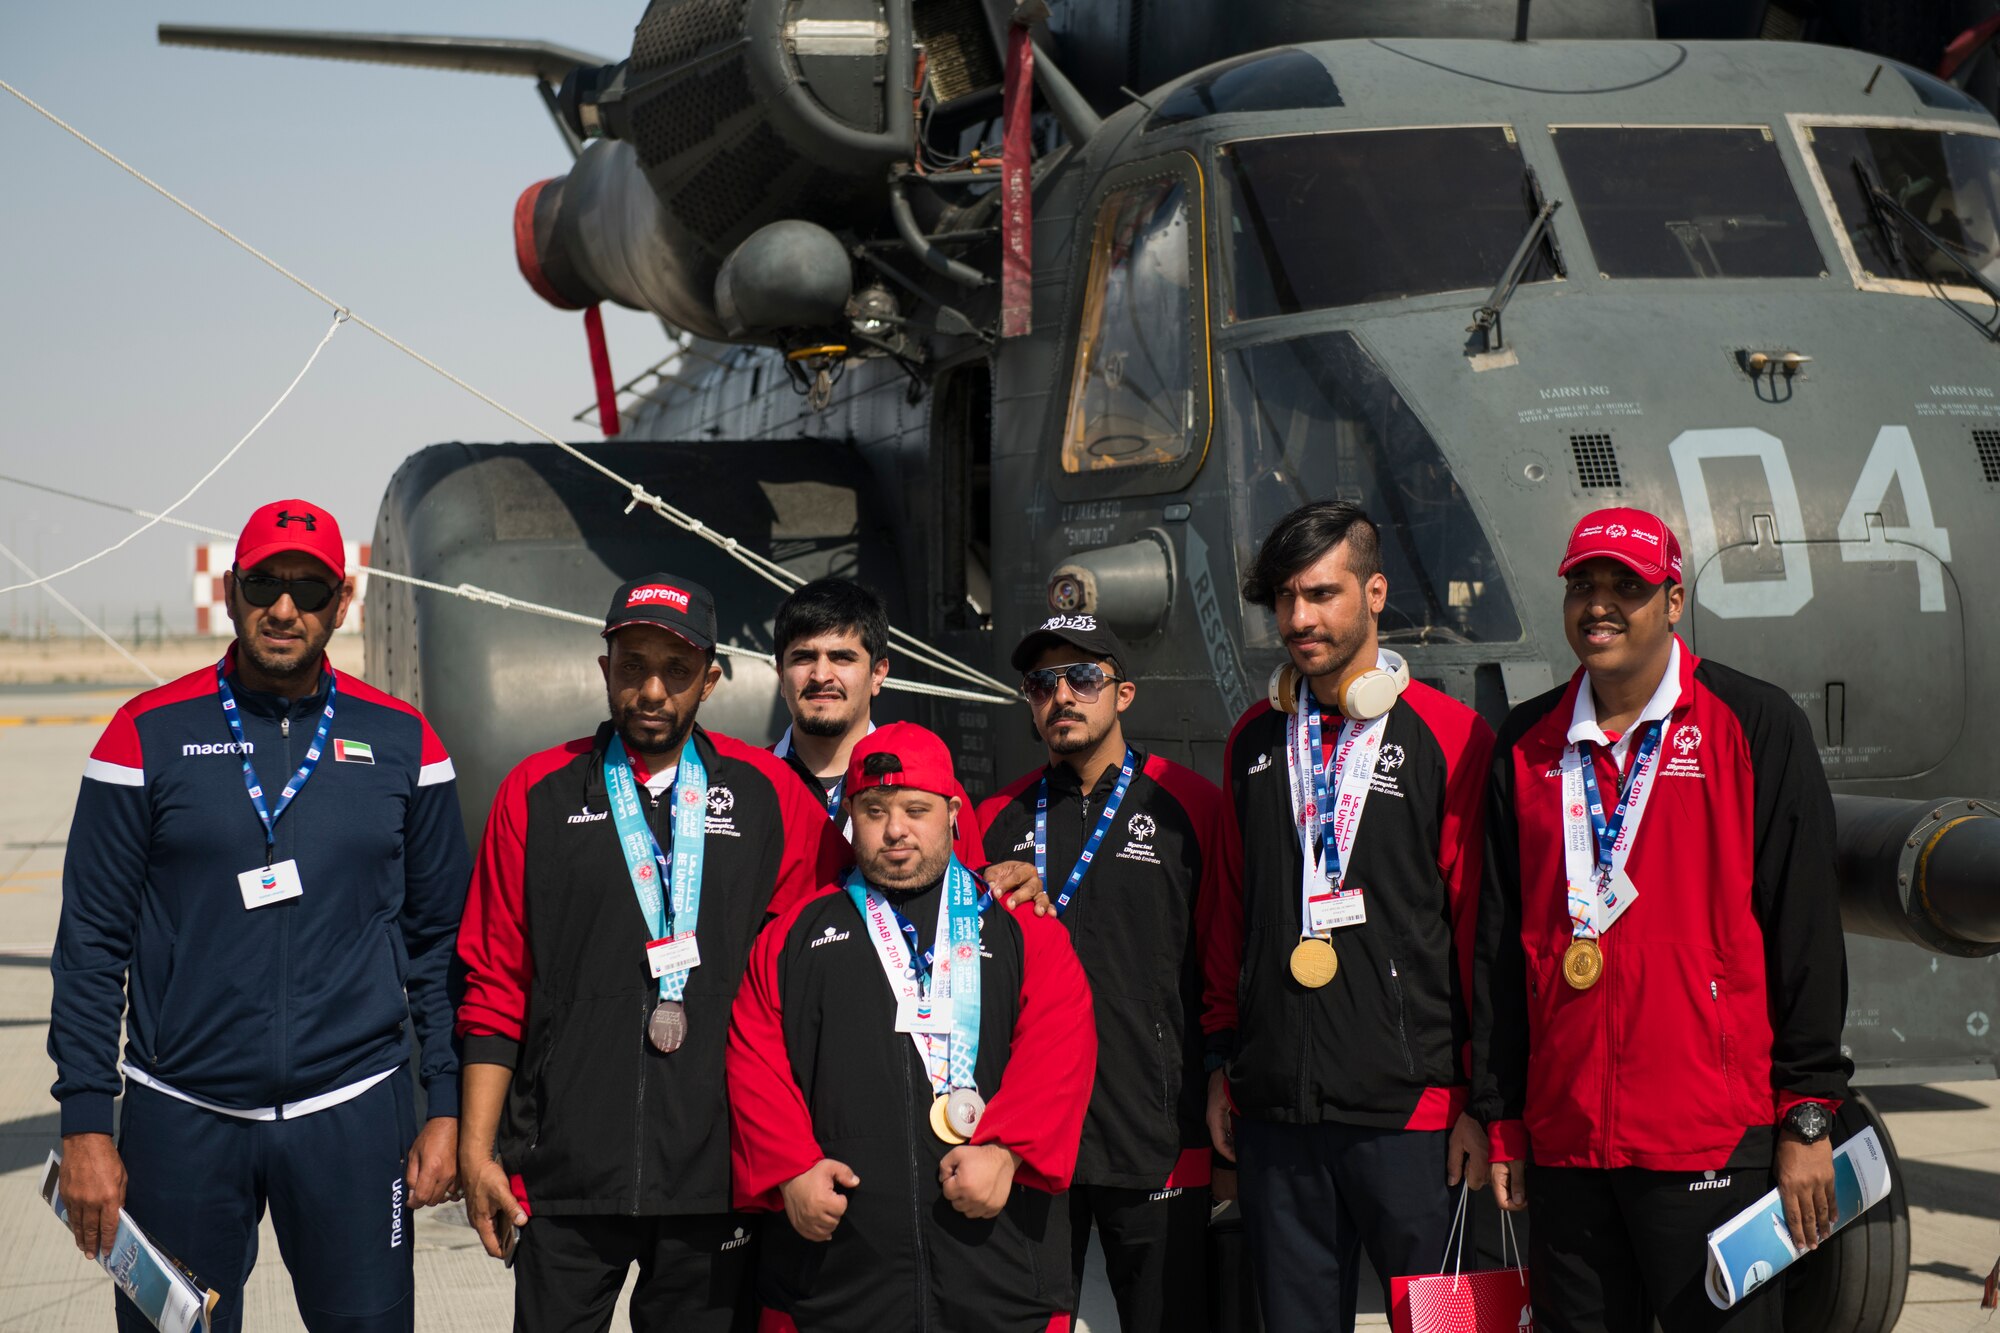 Members of the United Arab Emirates Special Olympics team tour U.S. military aircraft at the Dubai Airshow, United Arab Emirates, Nov. 18, 2019.